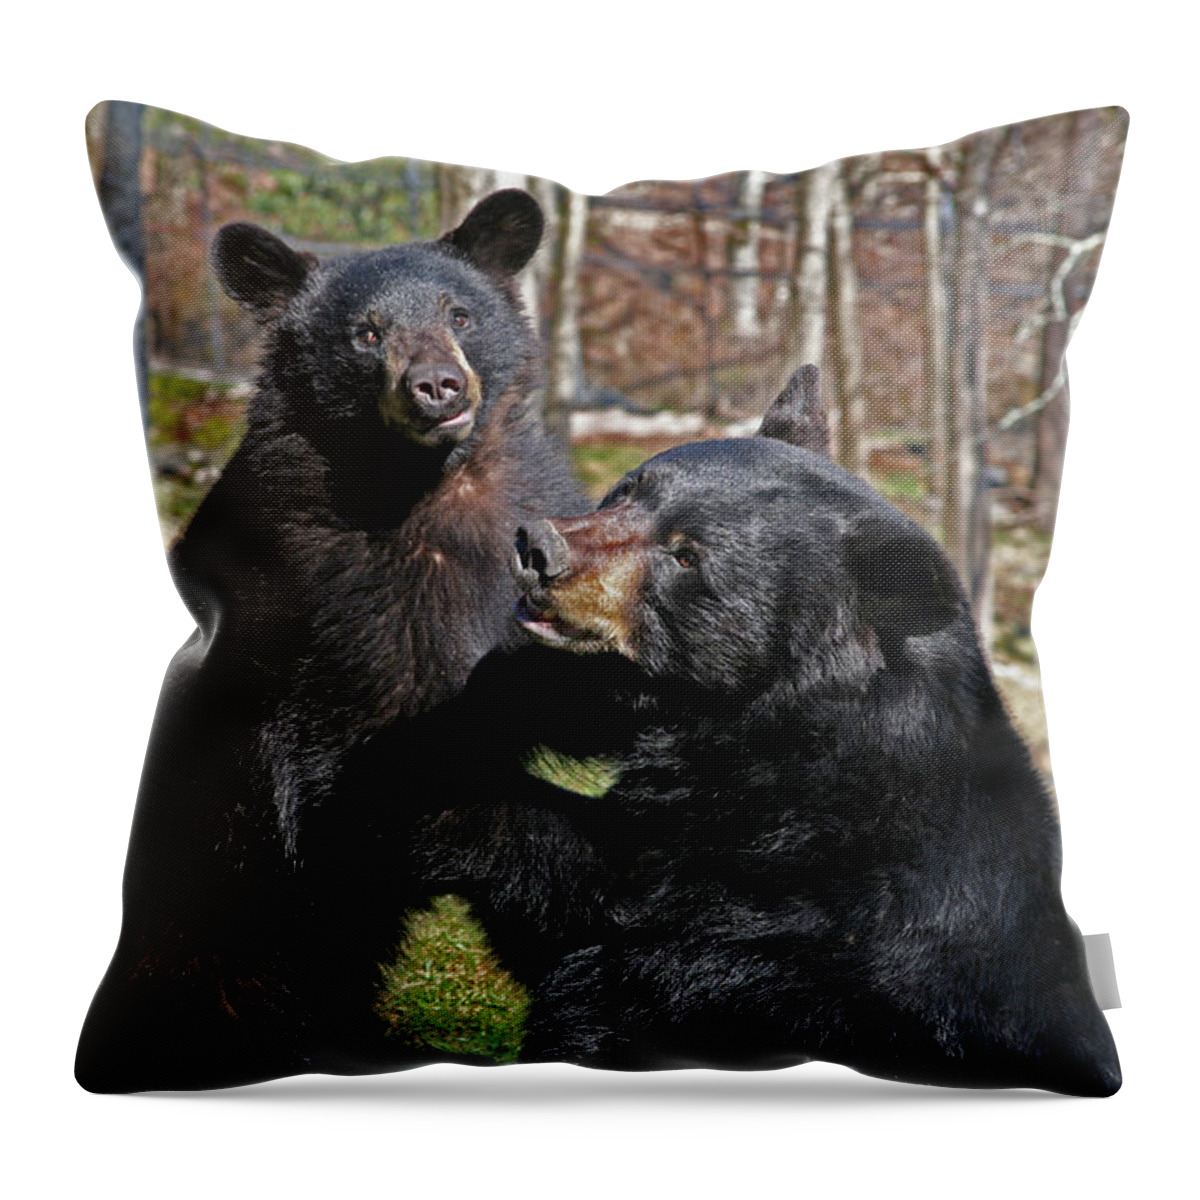 Animals.bears Throw Pillow featuring the photograph Playtime by Karol Livote